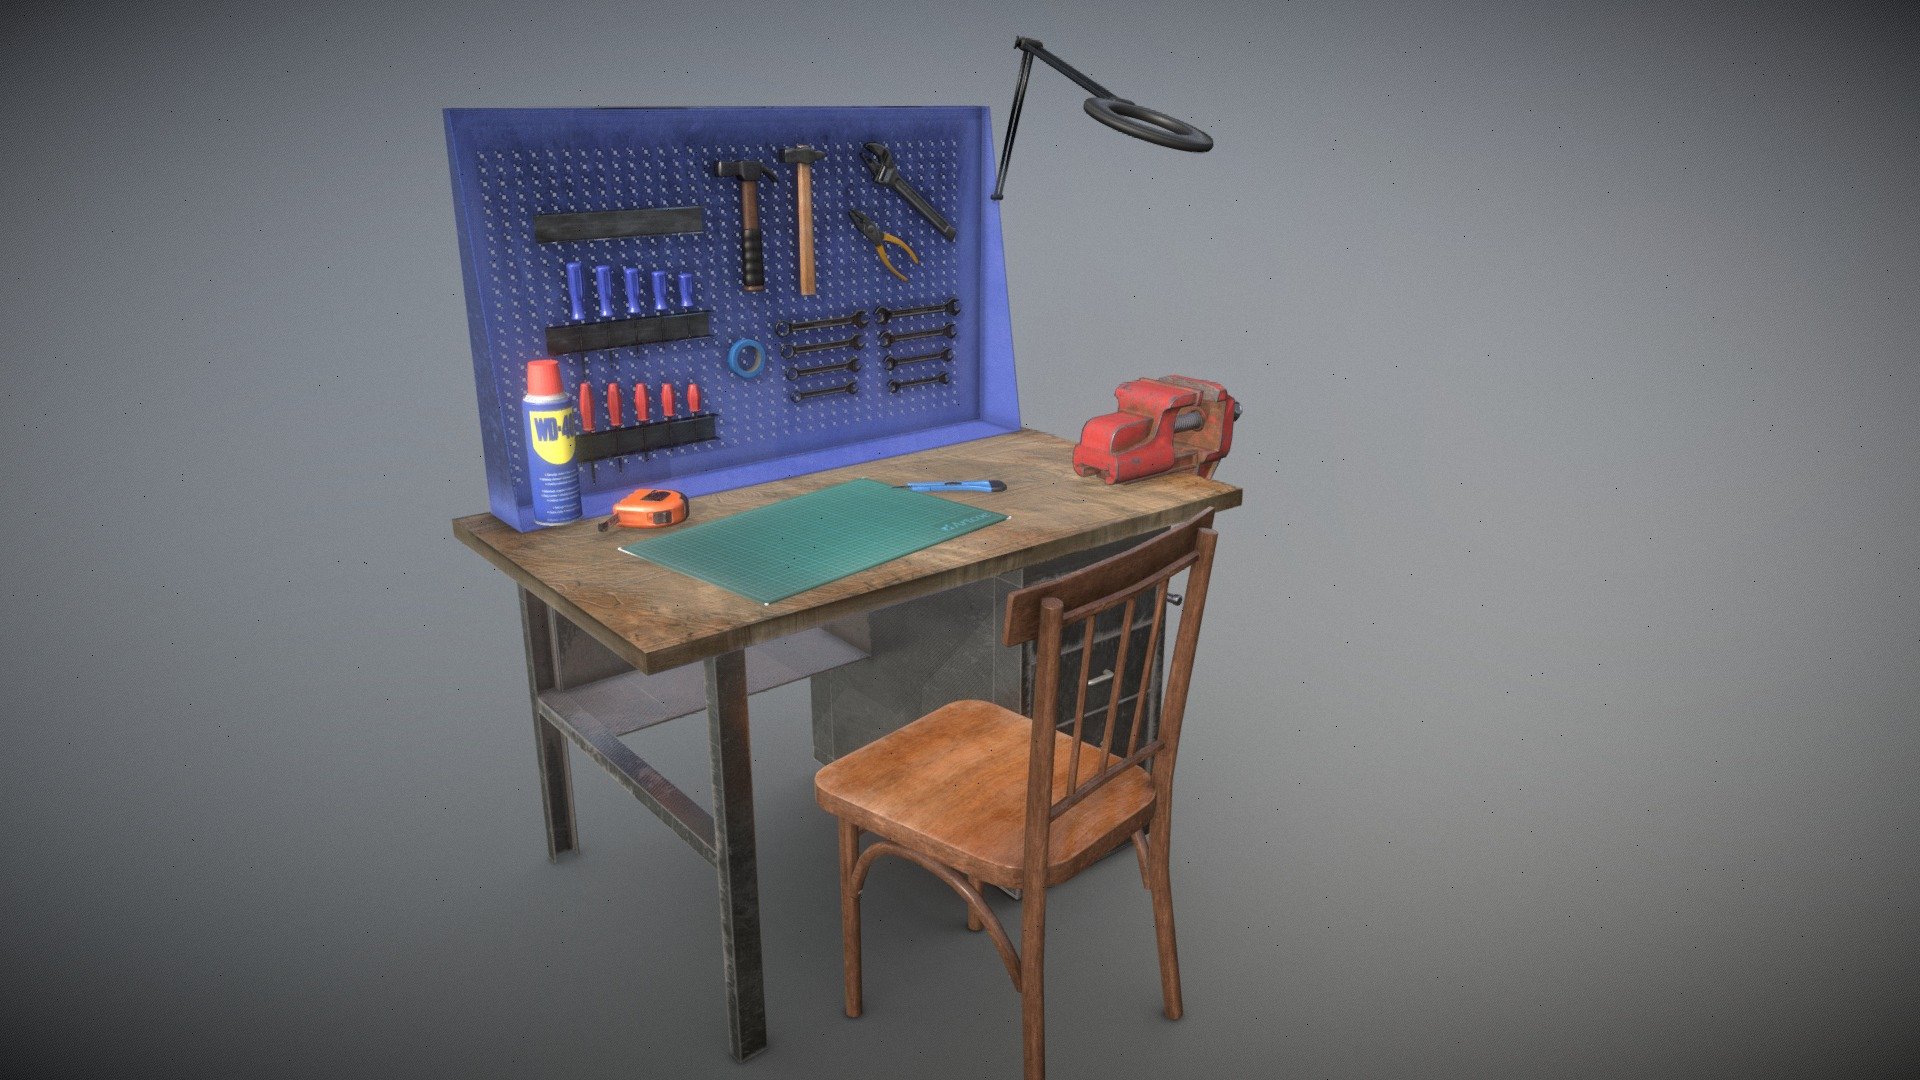 3D low-poly models of WorkBench Station

Every good worker has his own workbench in the garage.

PBR 4K texture set + AO for every object.

Models are logically named:

• Working Table

• Vice

• Wrench Tool

• 2 models of Hammer

• 2 screw Drivers Models

• WD-40

• Roulette

• Substratte

• Stationery Knife

• Mountable Lamp

• Pliers

• Blue Electrical Tape

Free 3 examples available:

• Hammer https://sketchfab.com/3d-models/just-a-simple-hammer-342d75827f6547179b70d612c3fa69c4

• Hammer 2 https://sketchfab.com/3d-models/just-a-simple-hammer-2-99e406eb26924654a6a0e7c7645a941b

• Wrench https://sketchfab.com/3d-models/stainless-steel-wrench-tool-5445c58e2dca45eb9845449d441b2d3d

Better textures are available in the native blend file. Models are based on references that exist in the public domain. Feel free to write if you need to create models in a different format 3d model